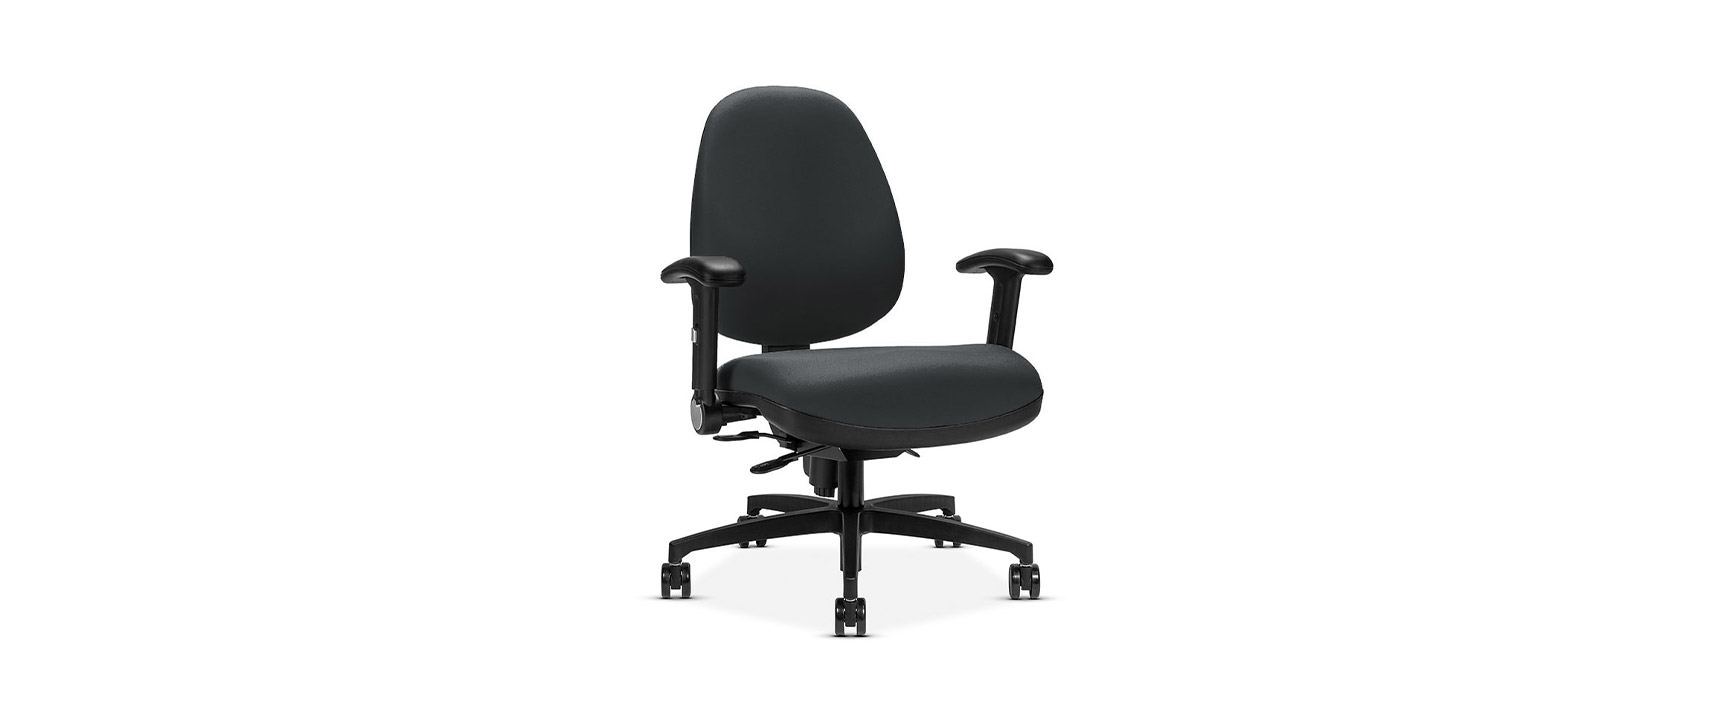 Optimize furniture seat height for comfort & safety - Chair solutions